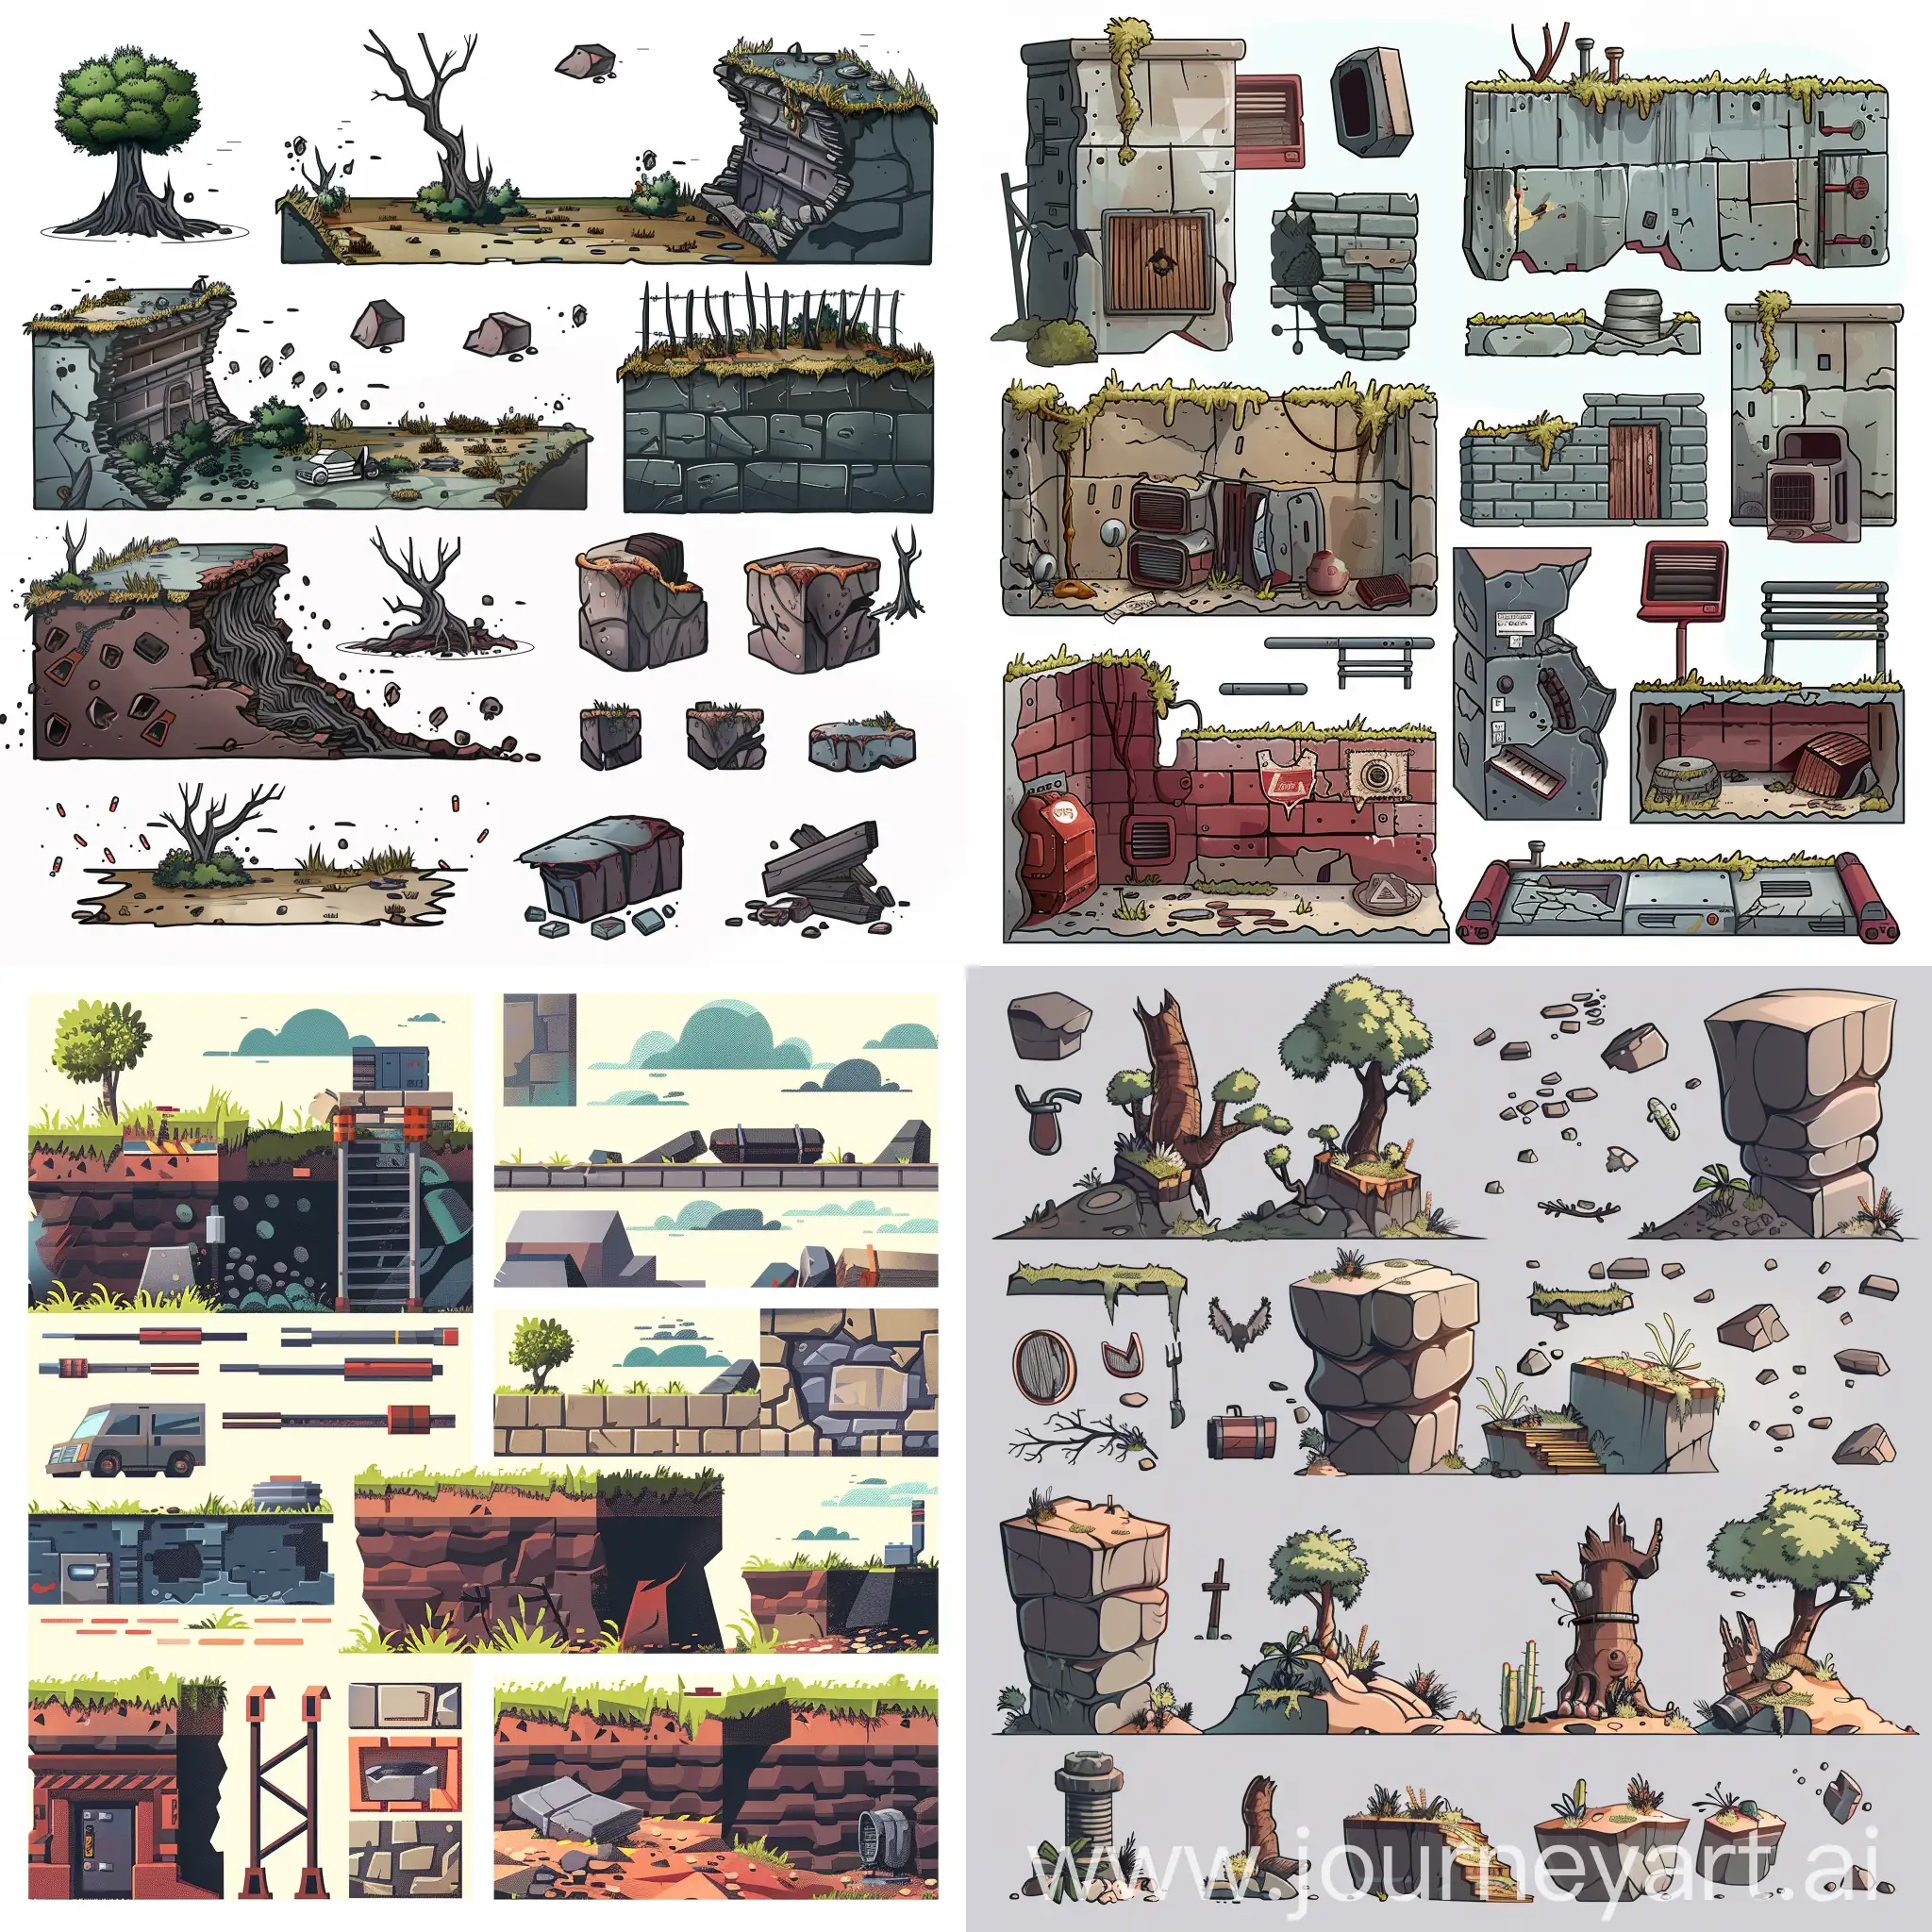 ground for 2D platformer in sectional view, a set of sprites for a 2D platformer, post-apocalypse,  unity, simple 2D illustration style